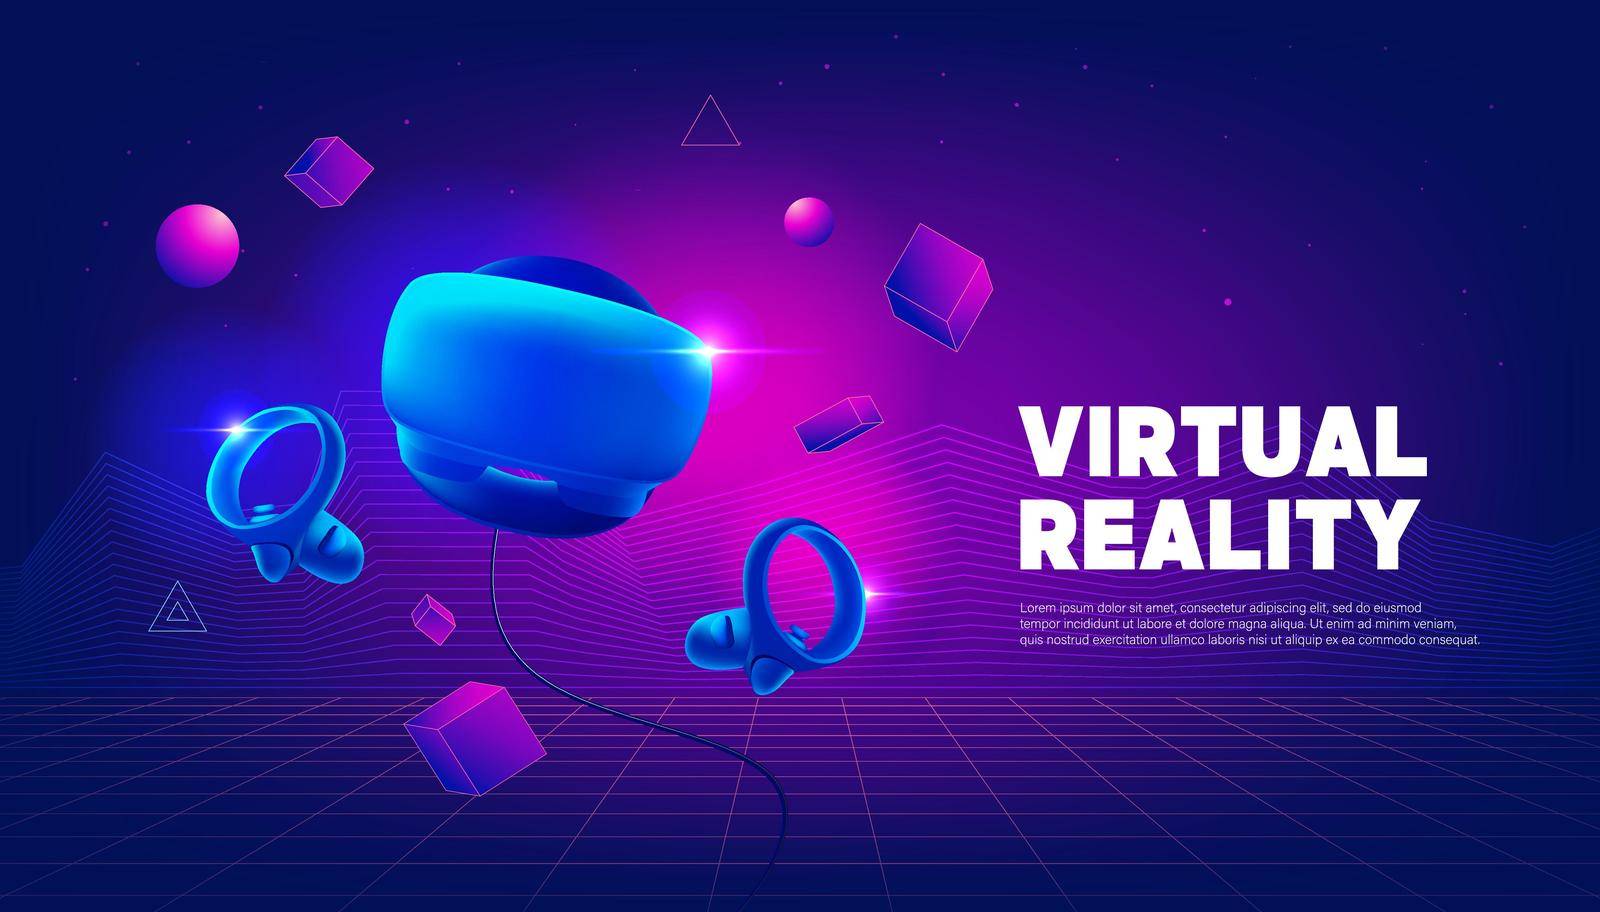 Virtual reality headset and controllers for gaming. VR helmet. Metaverse technology banner template. by windawake